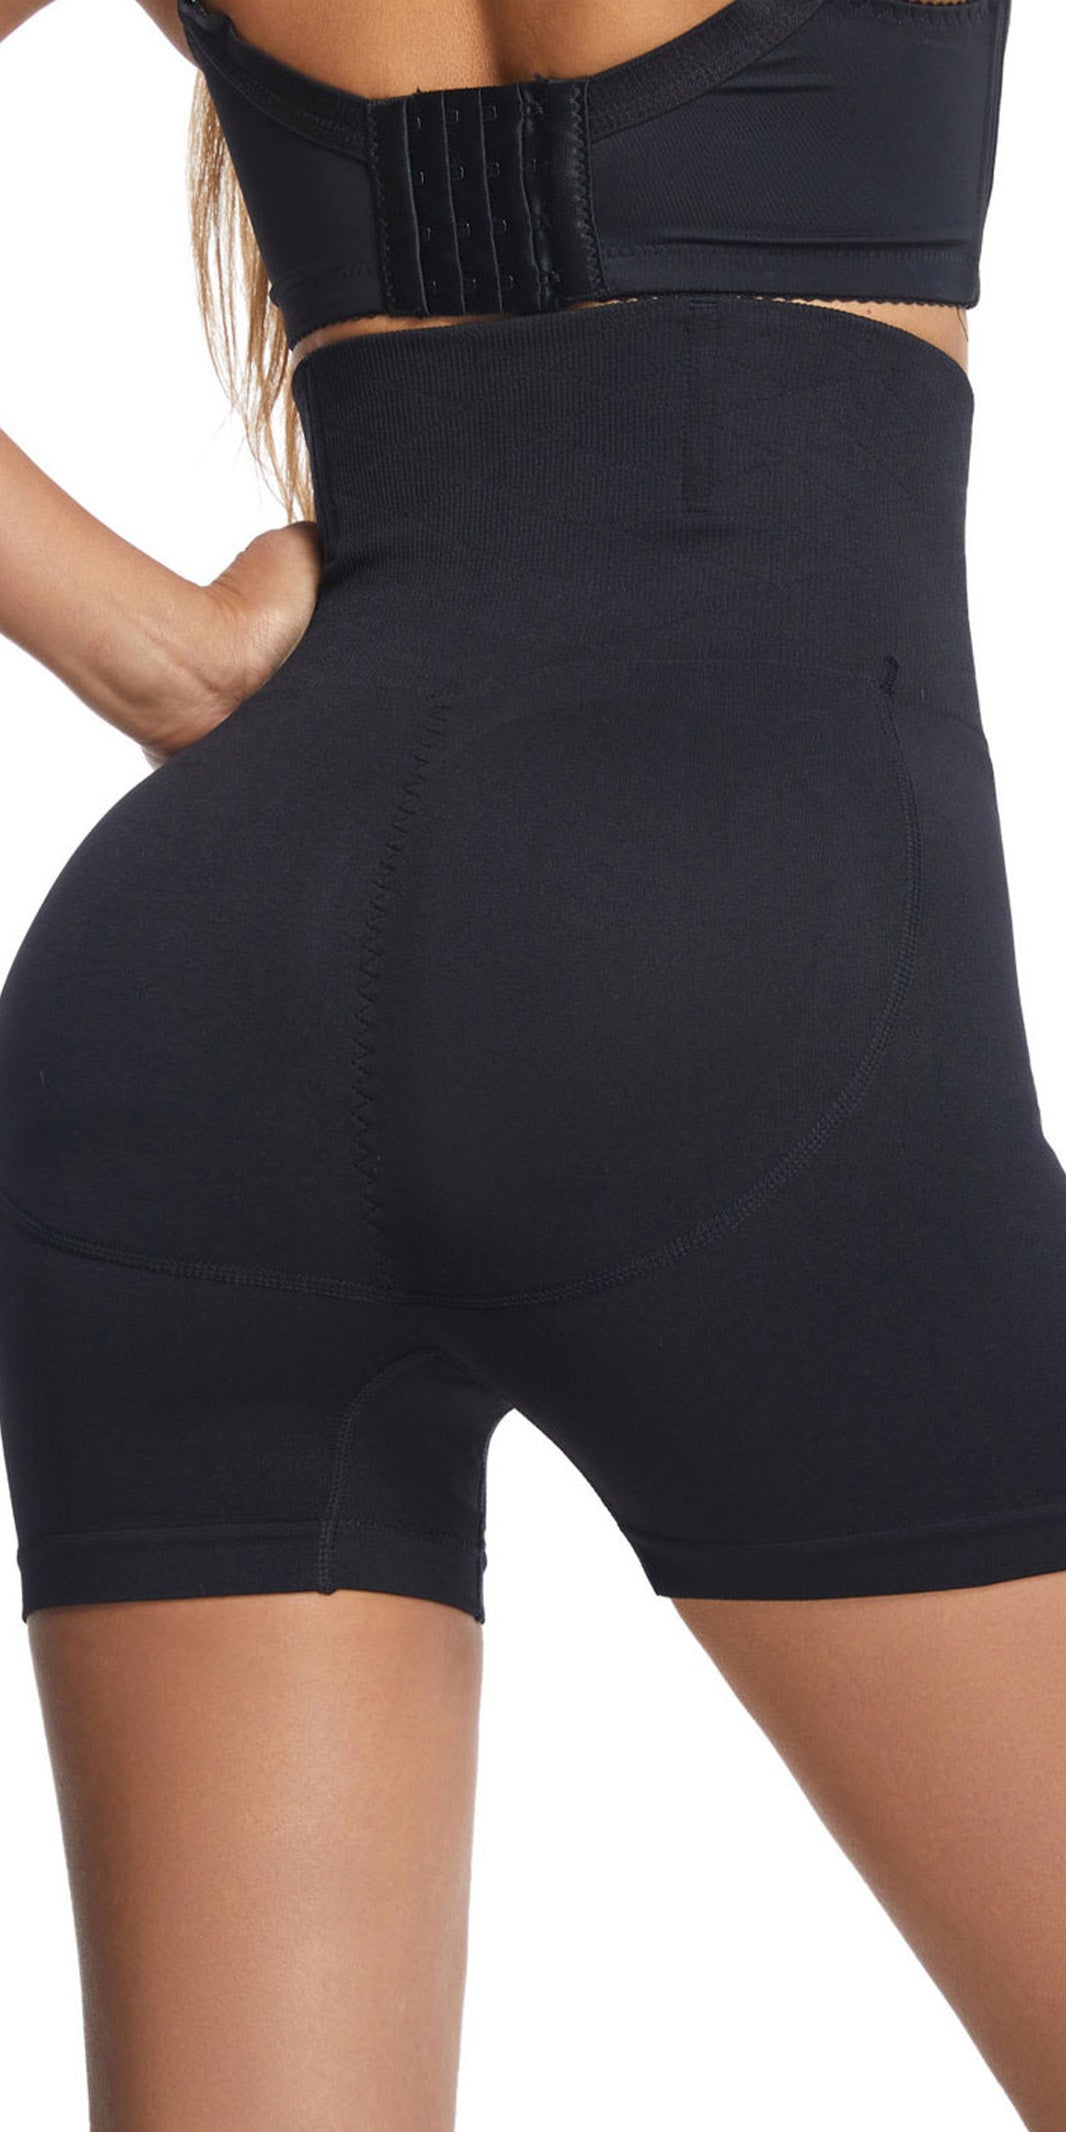 High Waisted Tummy Tuck Removable Foam Padded Buttock Enhancement Shapewear Panties